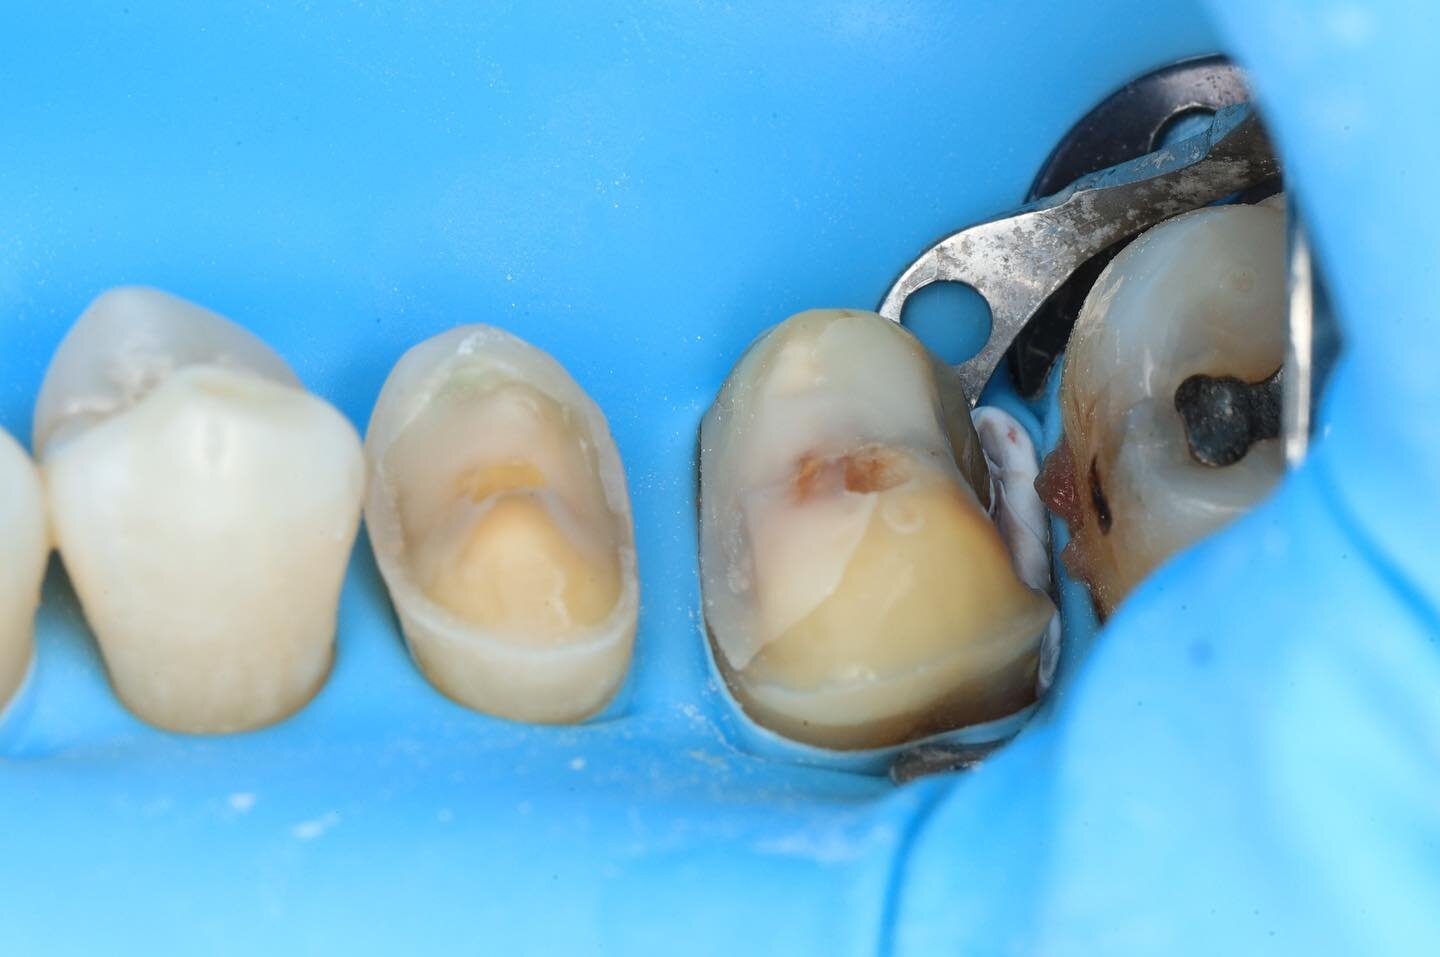 Cerasmart crownlays for teeth 15 and 16. Photos are hopefully self-explanatory. Dismantle, caries removal endpoint, deep margin elevation, teeth preparation and bonding of the final restorations.